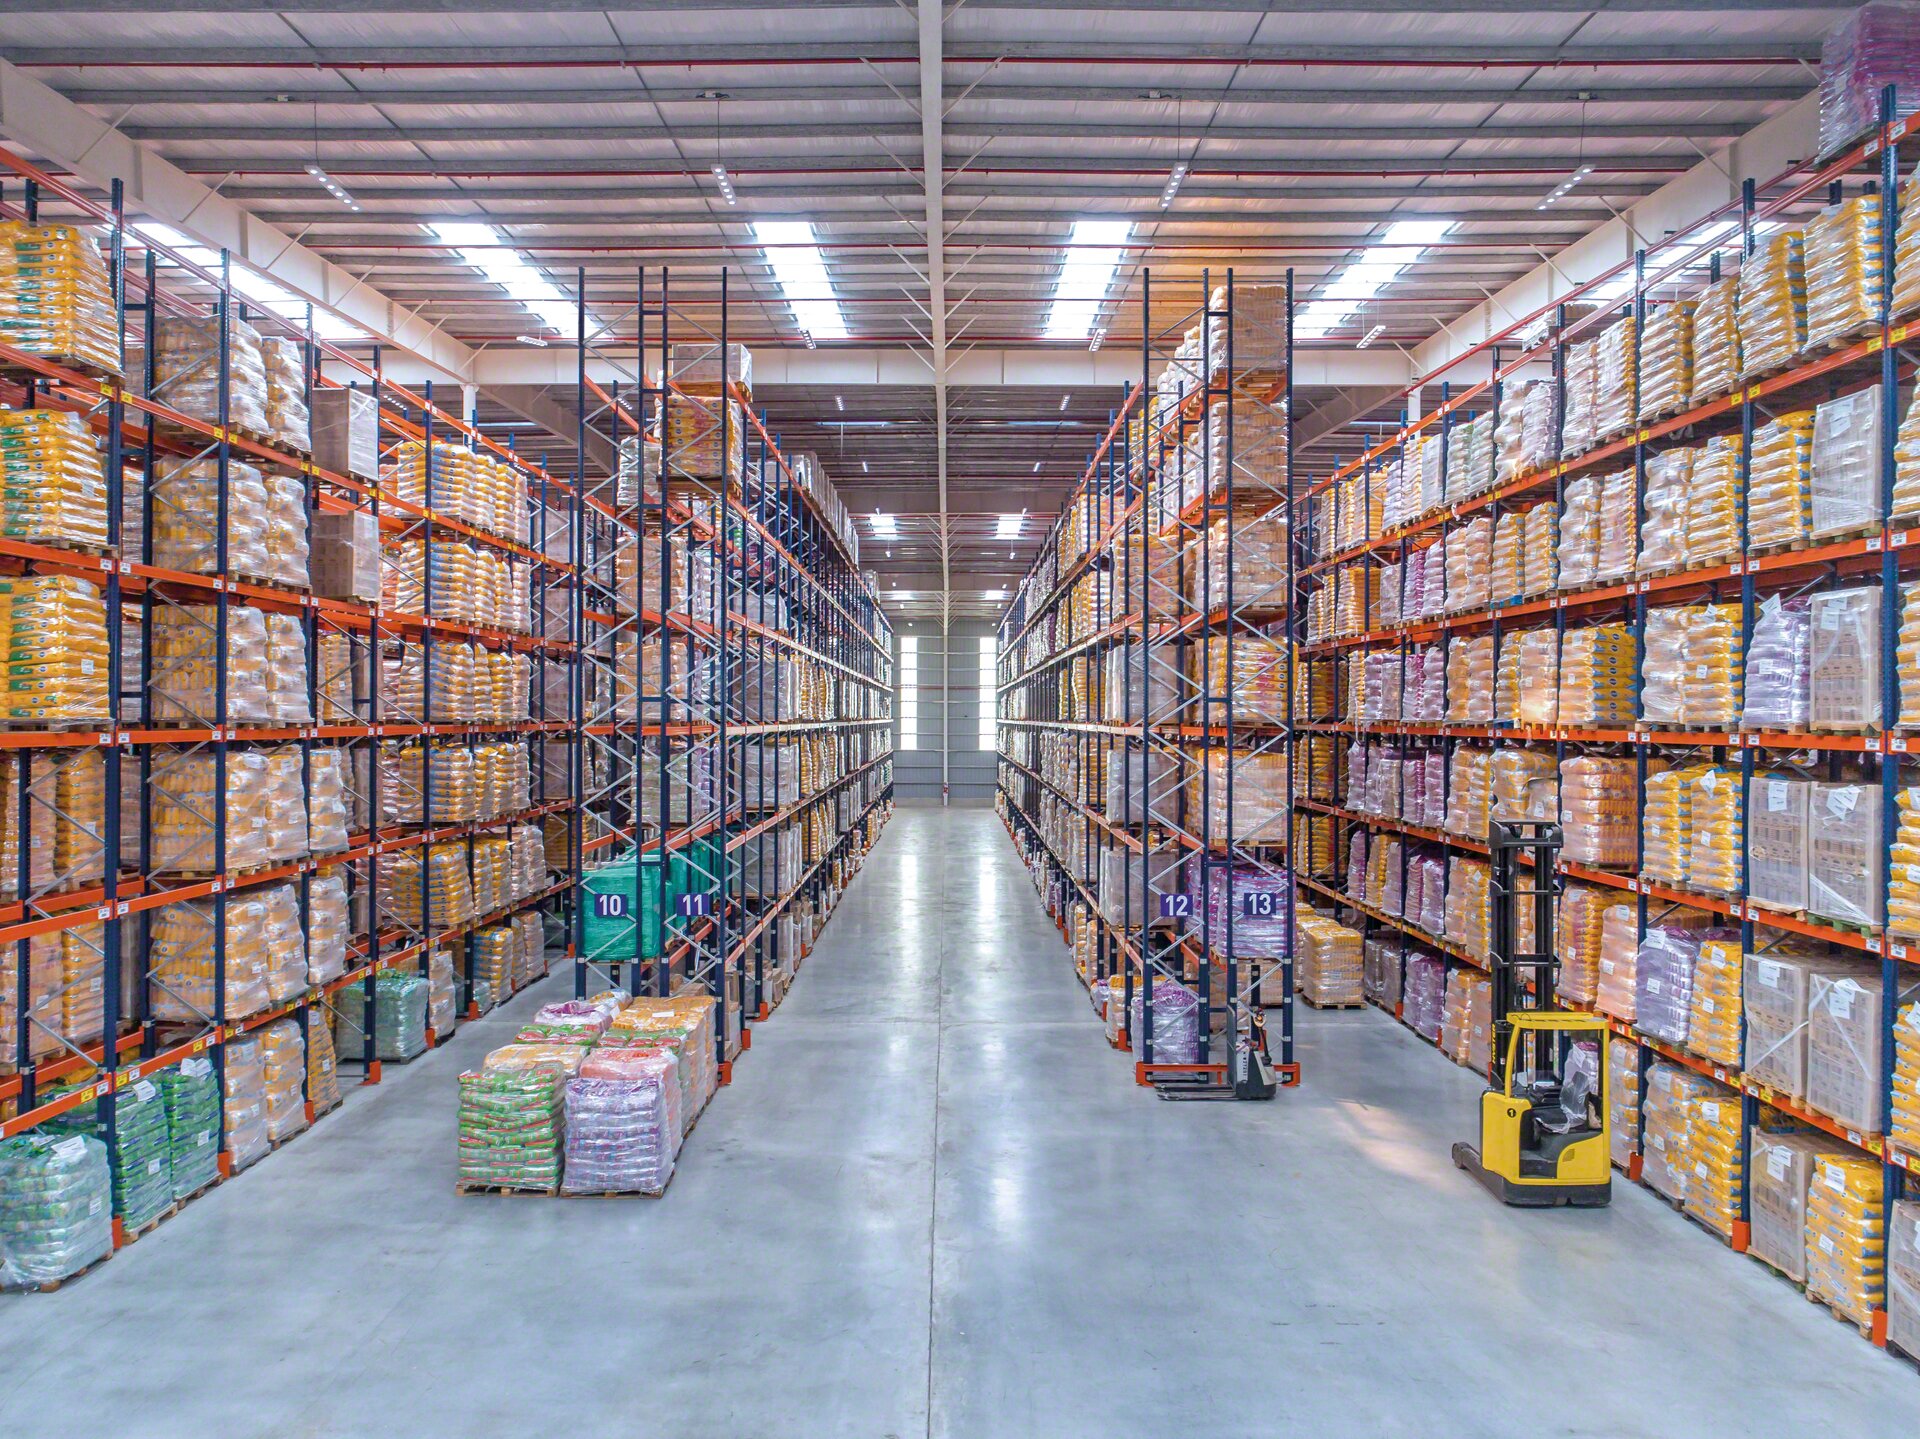 In tall pallet rack warehouses, reach trucks are required to handle the goods